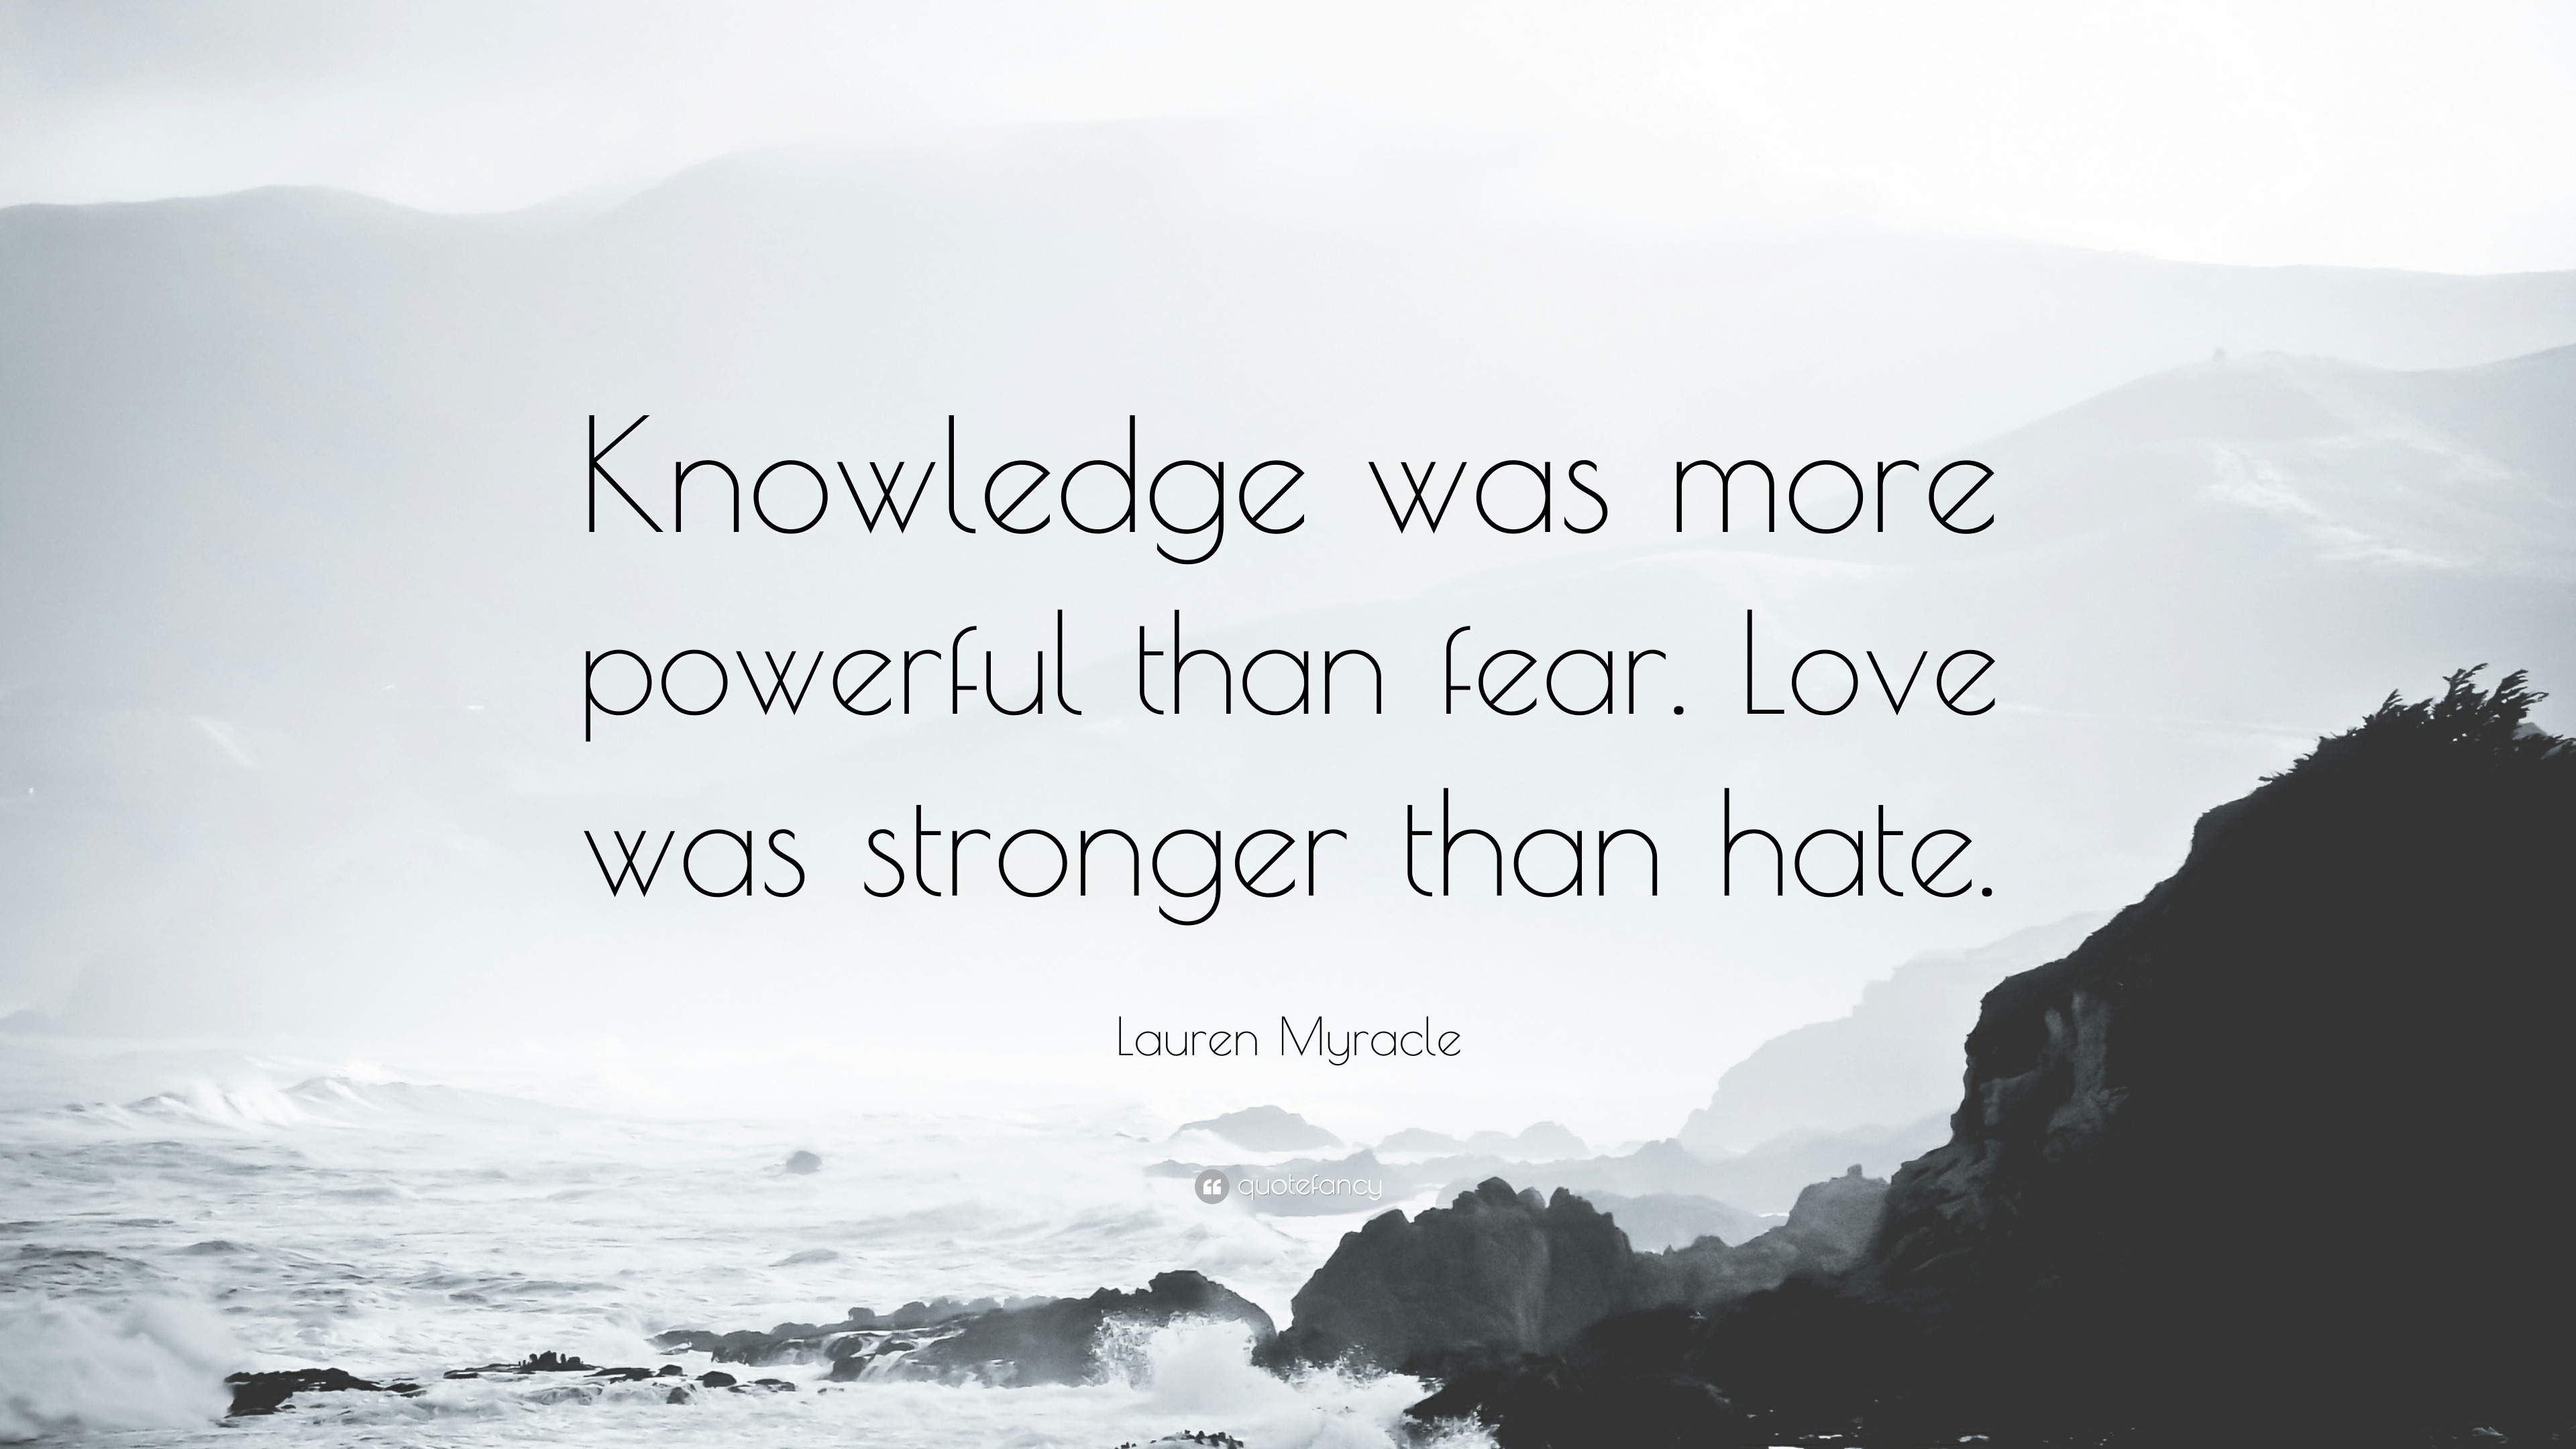 Lauren Myracle Quote “Knowledge was more powerful than fear Love was stronger than